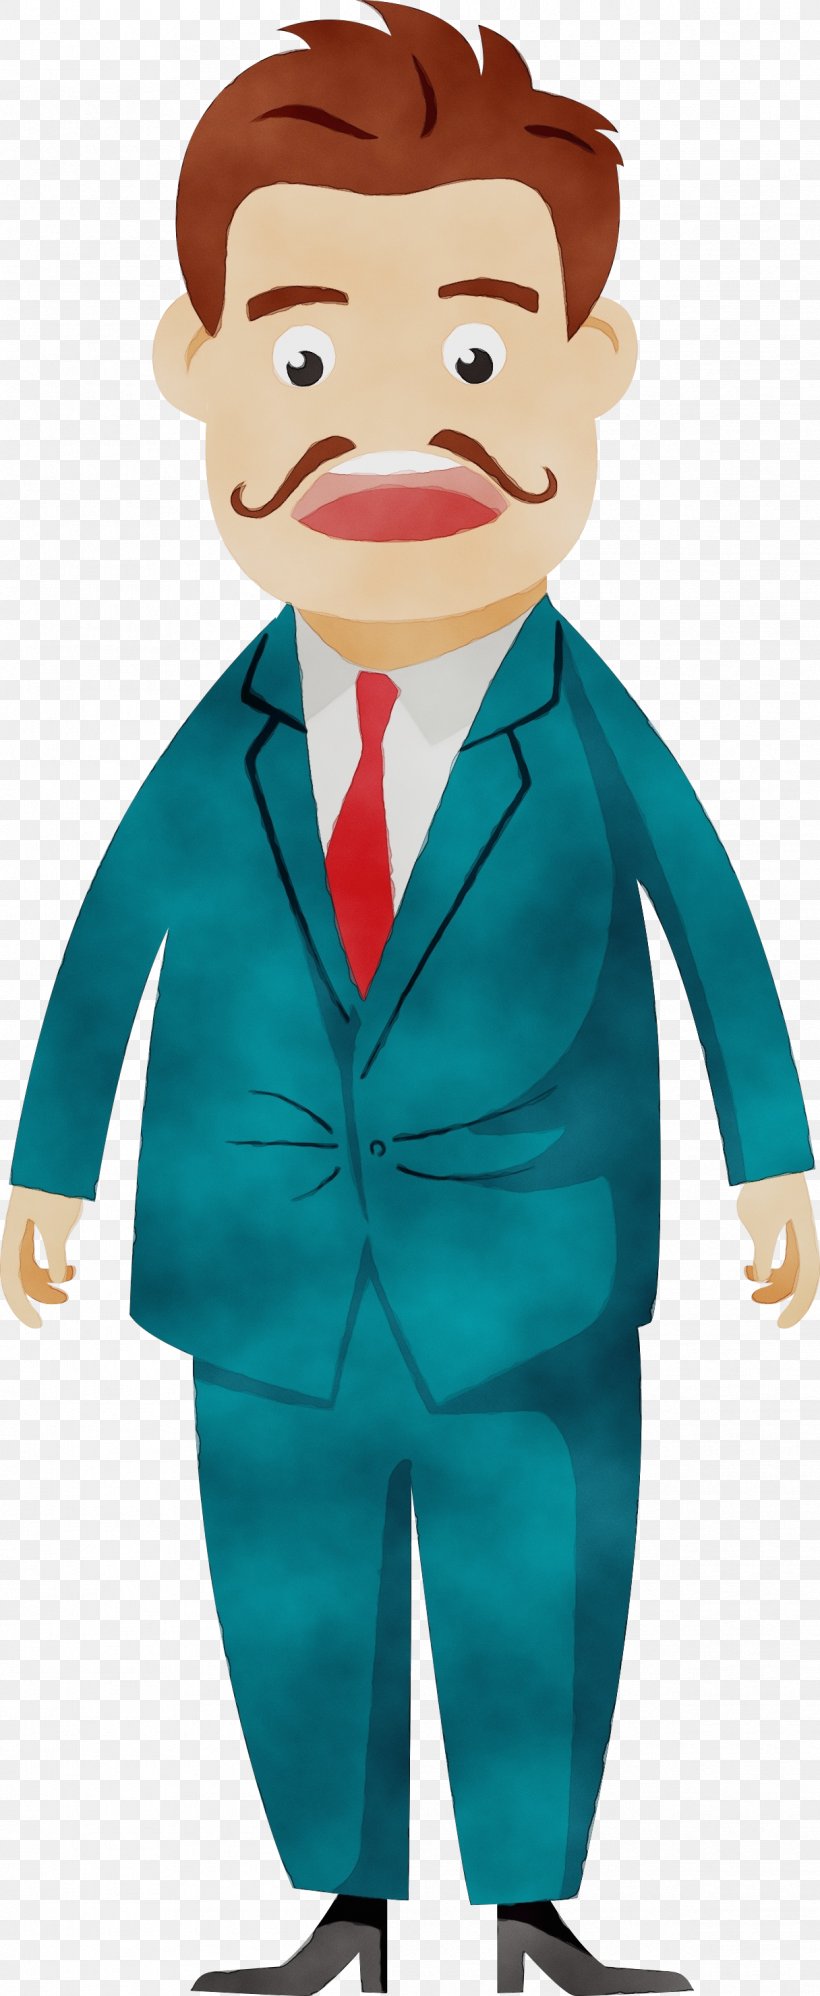 Cartoon Green Turquoise Fictional Character Formal Wear, PNG, 1216x2960px, Watercolor, Cartoon, Costume, Fictional Character, Formal Wear Download Free